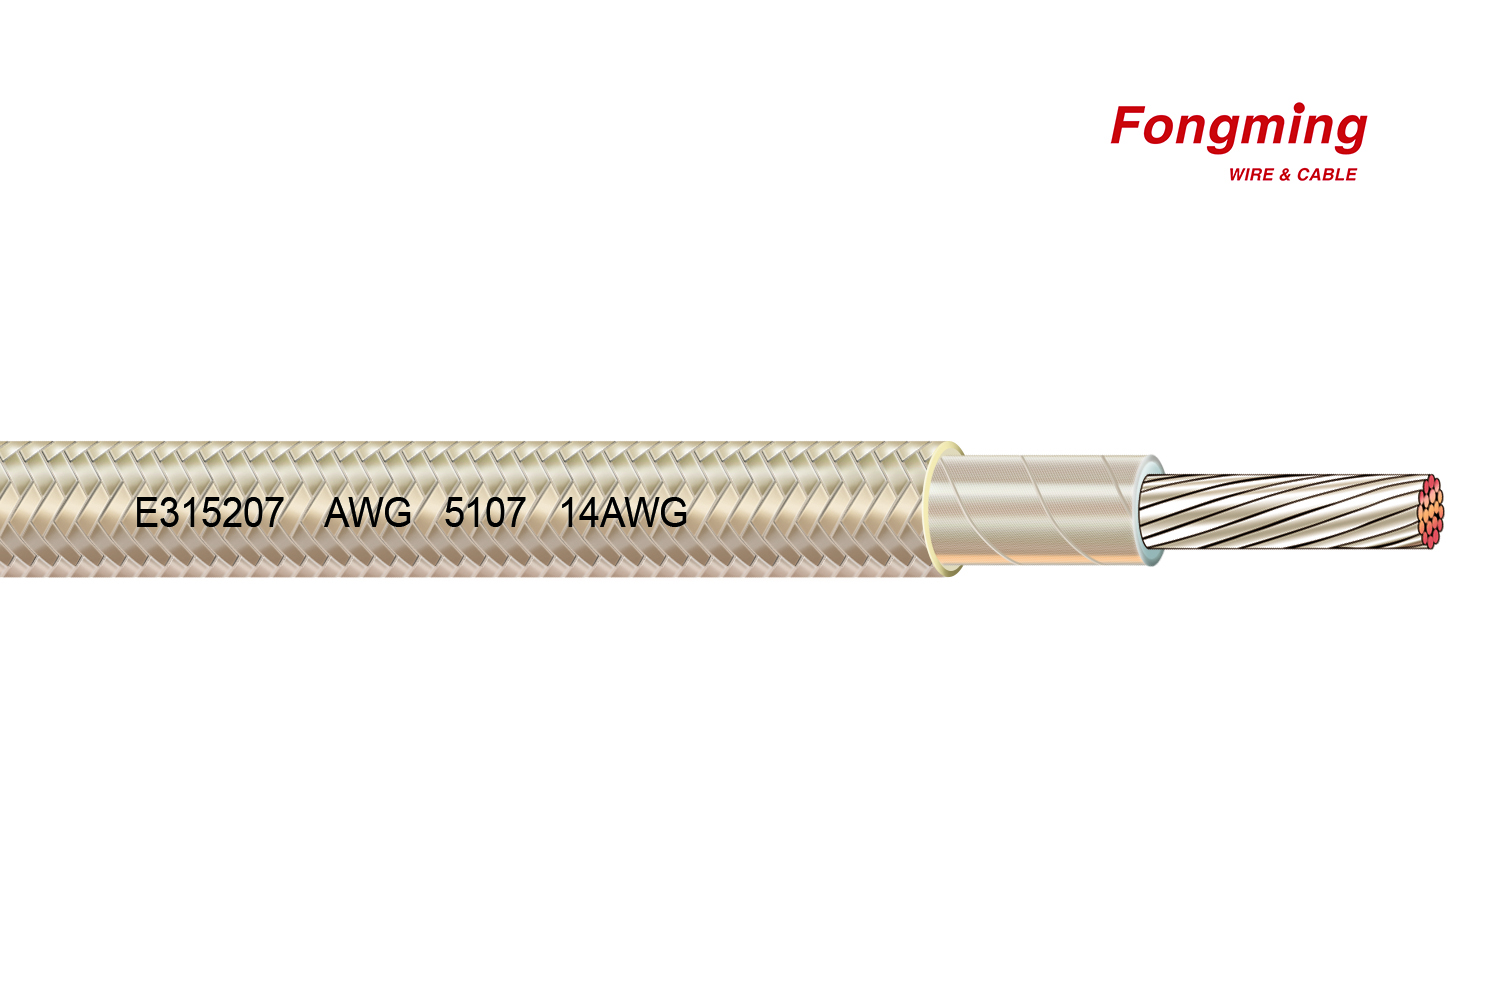 Yangzhou Fongming Cable: Do you know the names of several mica high temperature wires